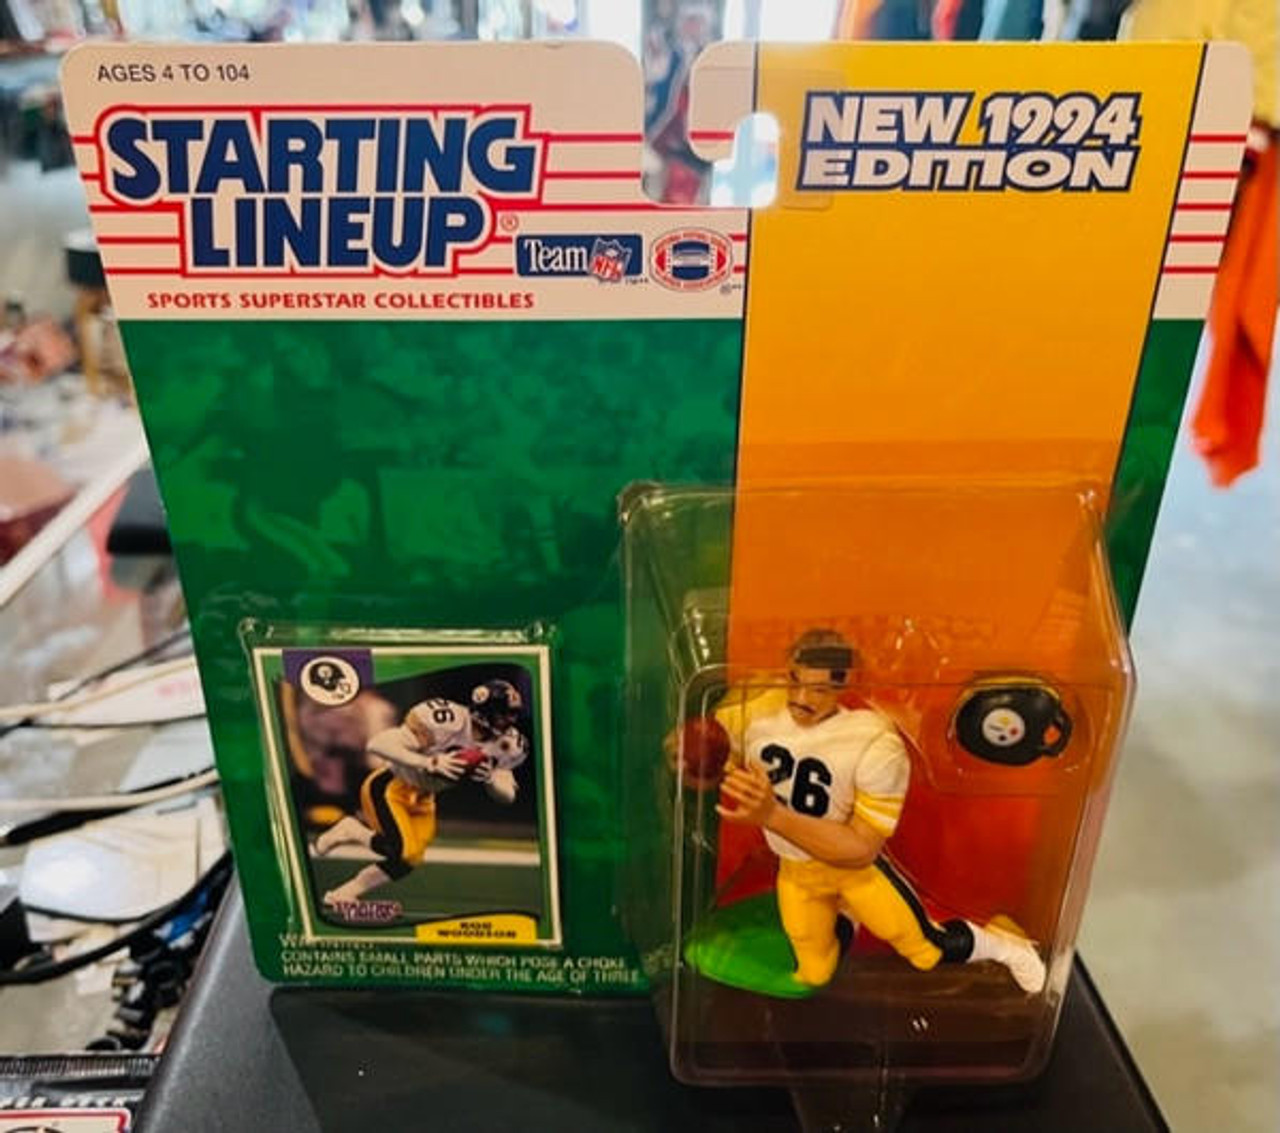 26 Woodson- Official NFL Pittsburgh Steelers Throwback Collection